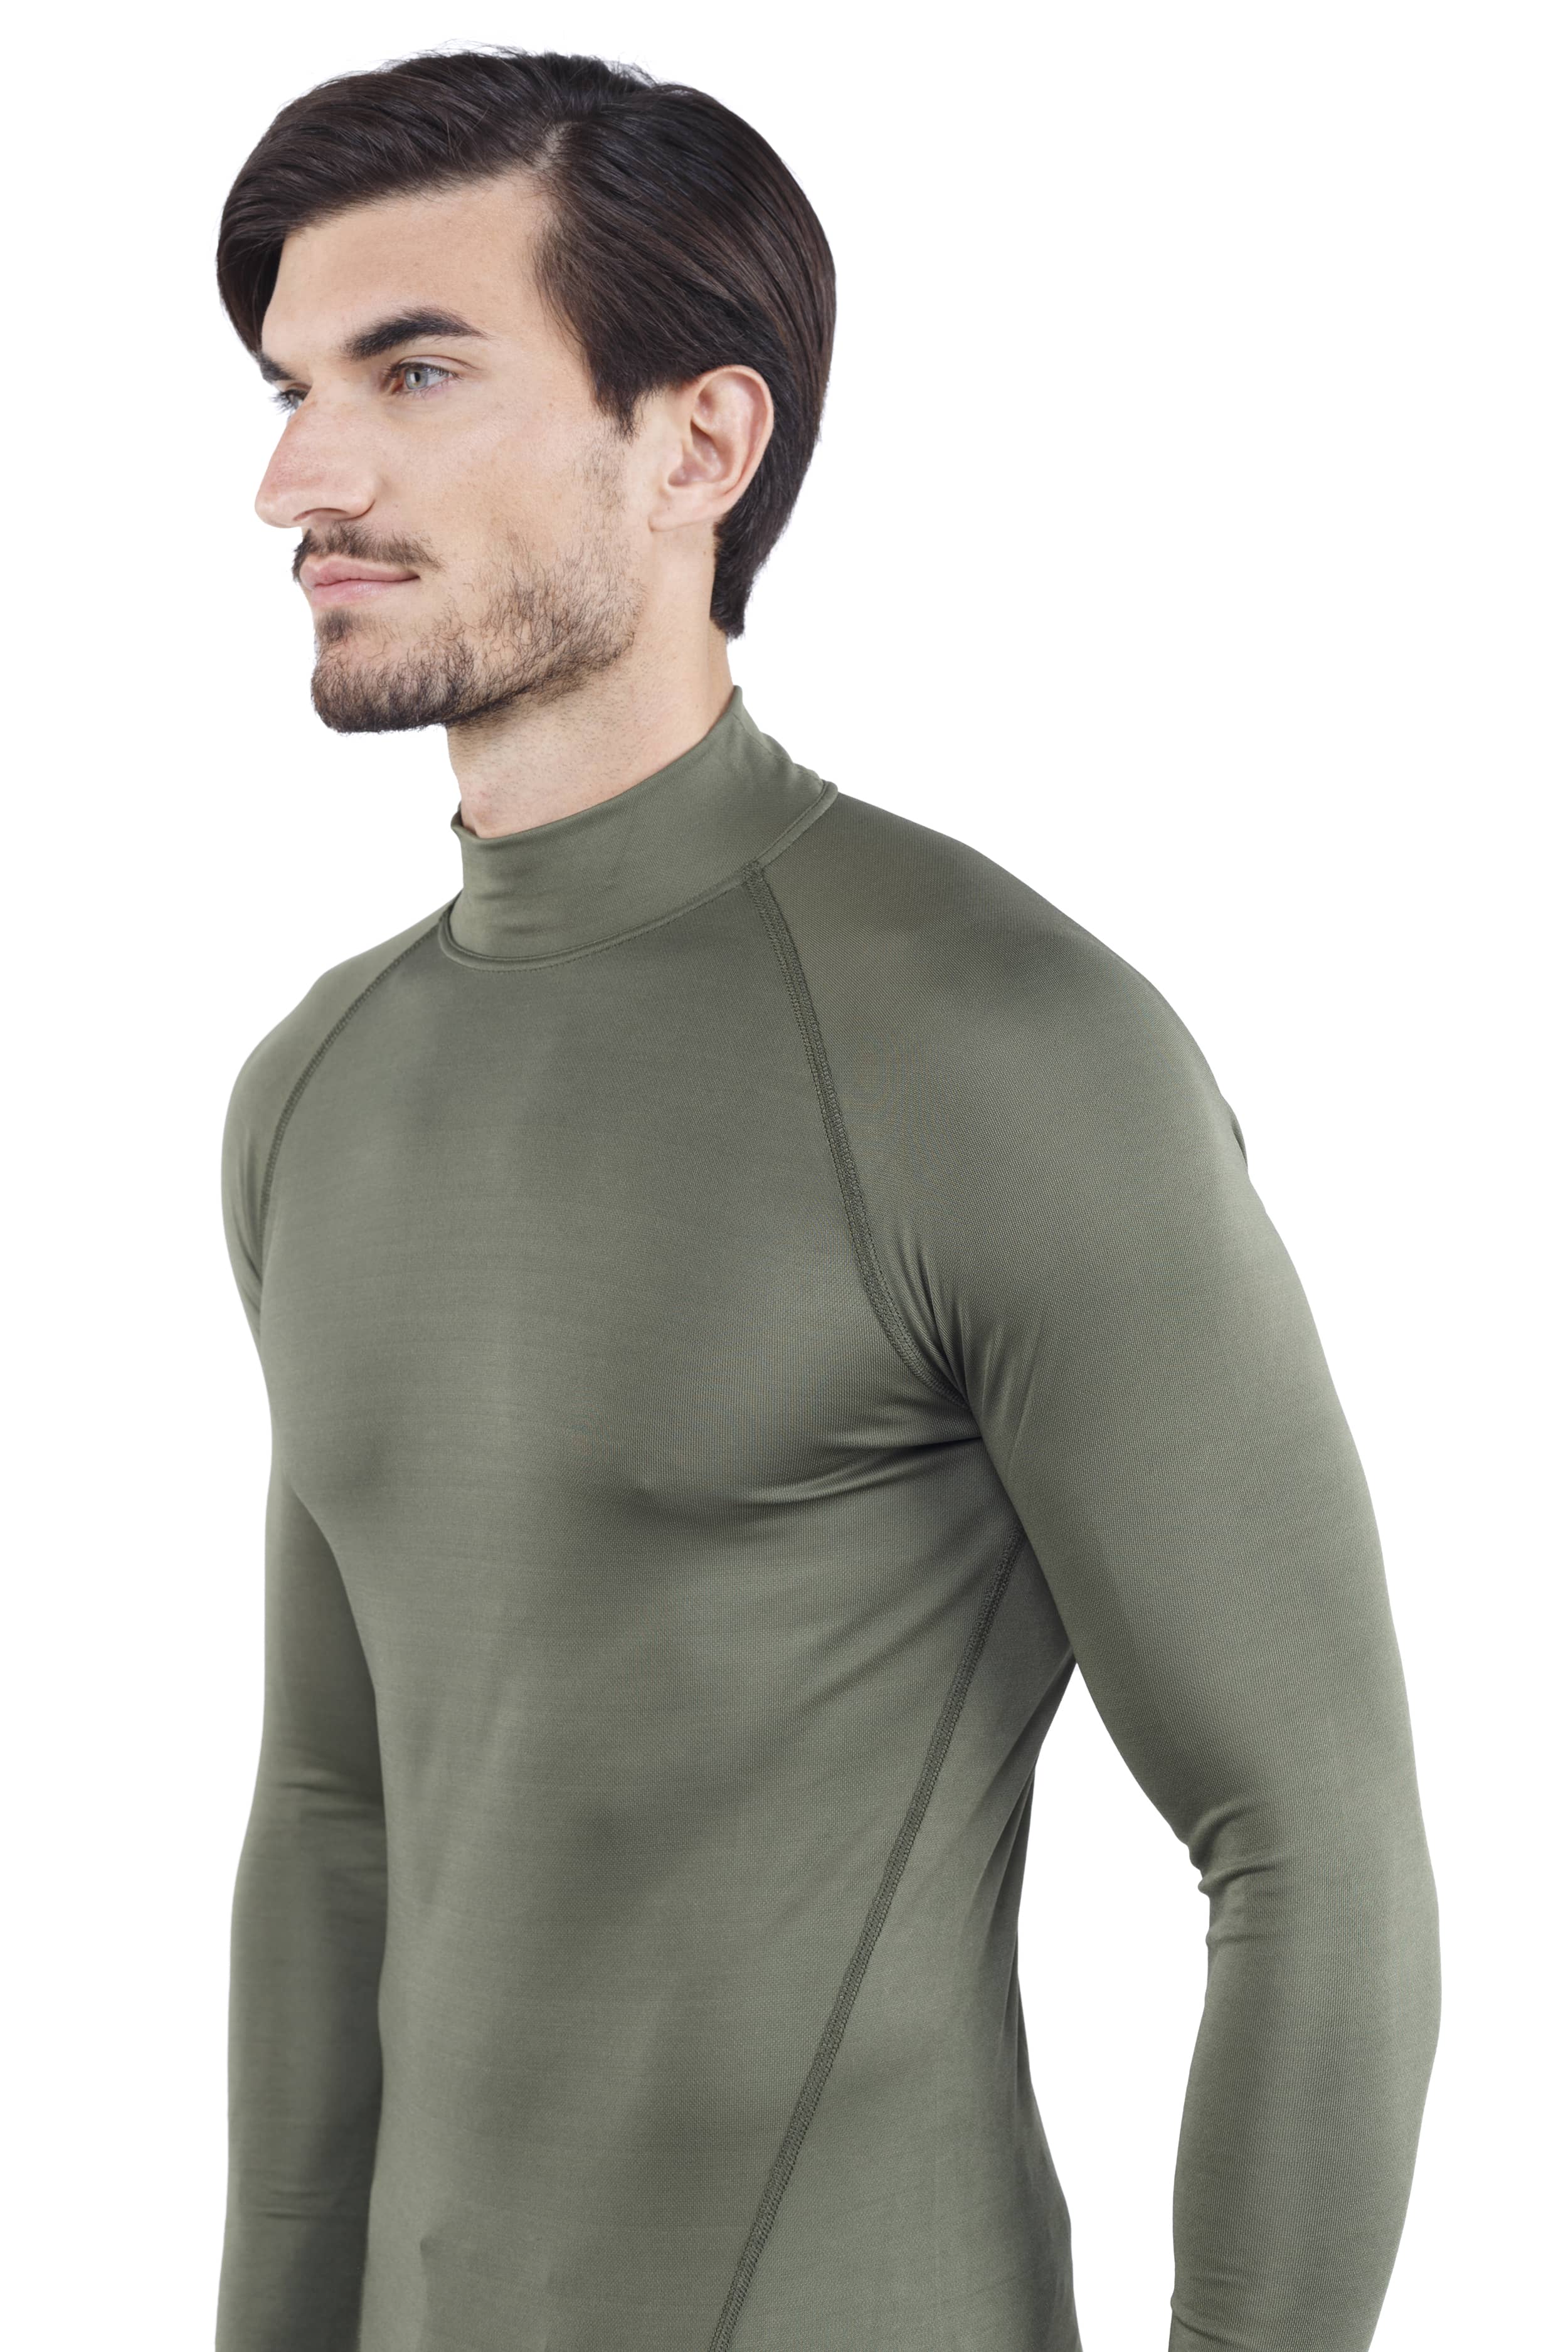 ARMY FIREPROOF THERMAL COMBAT SHIRT